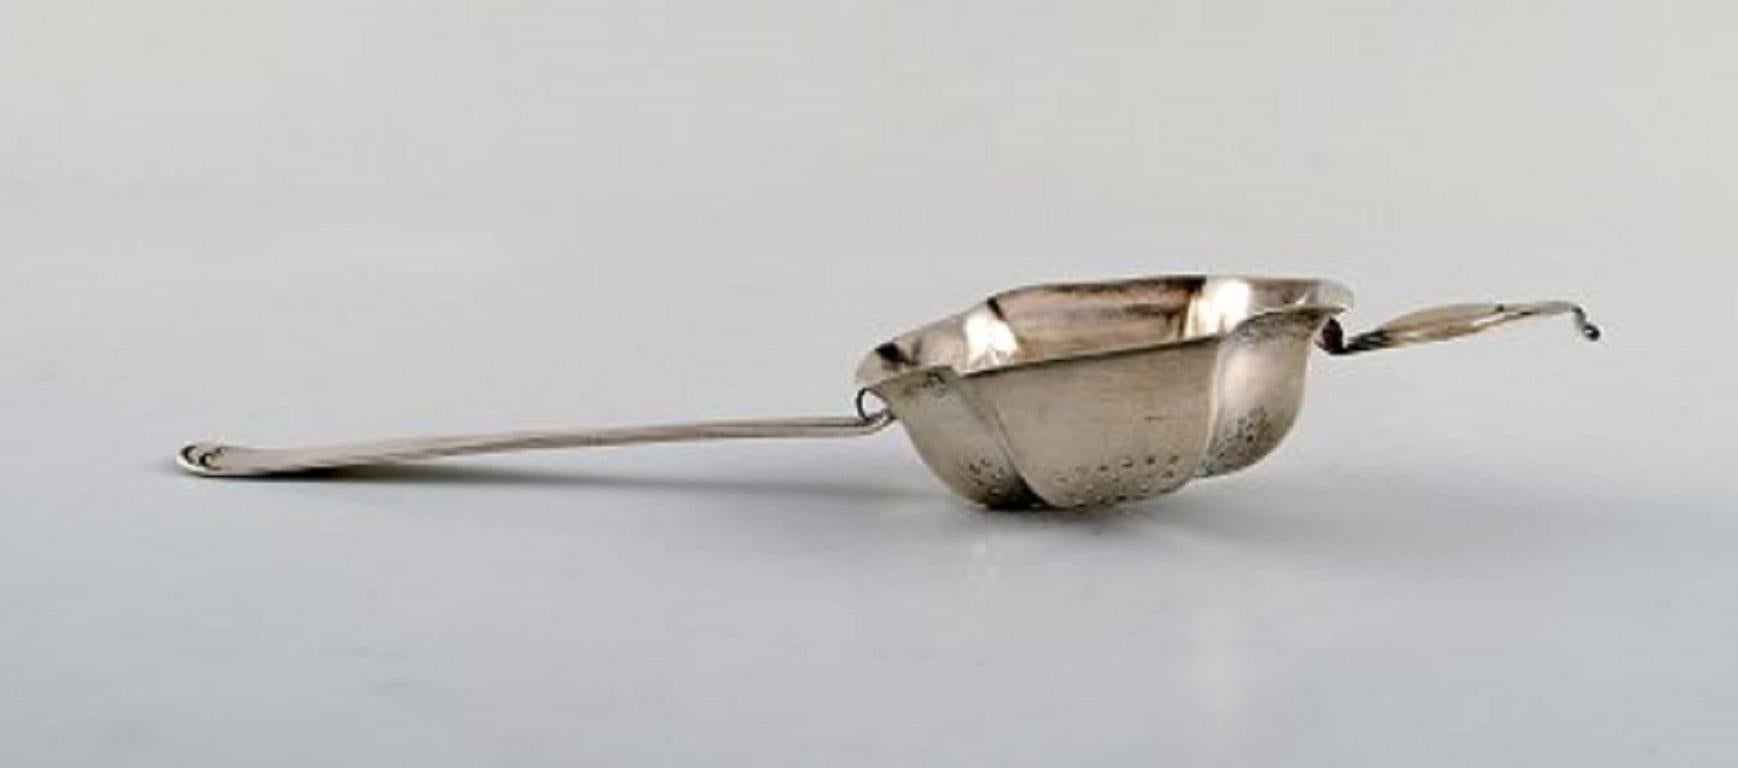 Danish tea strainer in silver. Dated 1950.
Measures: 18.3 x 6 cm.
In very good condition.
Stamped.